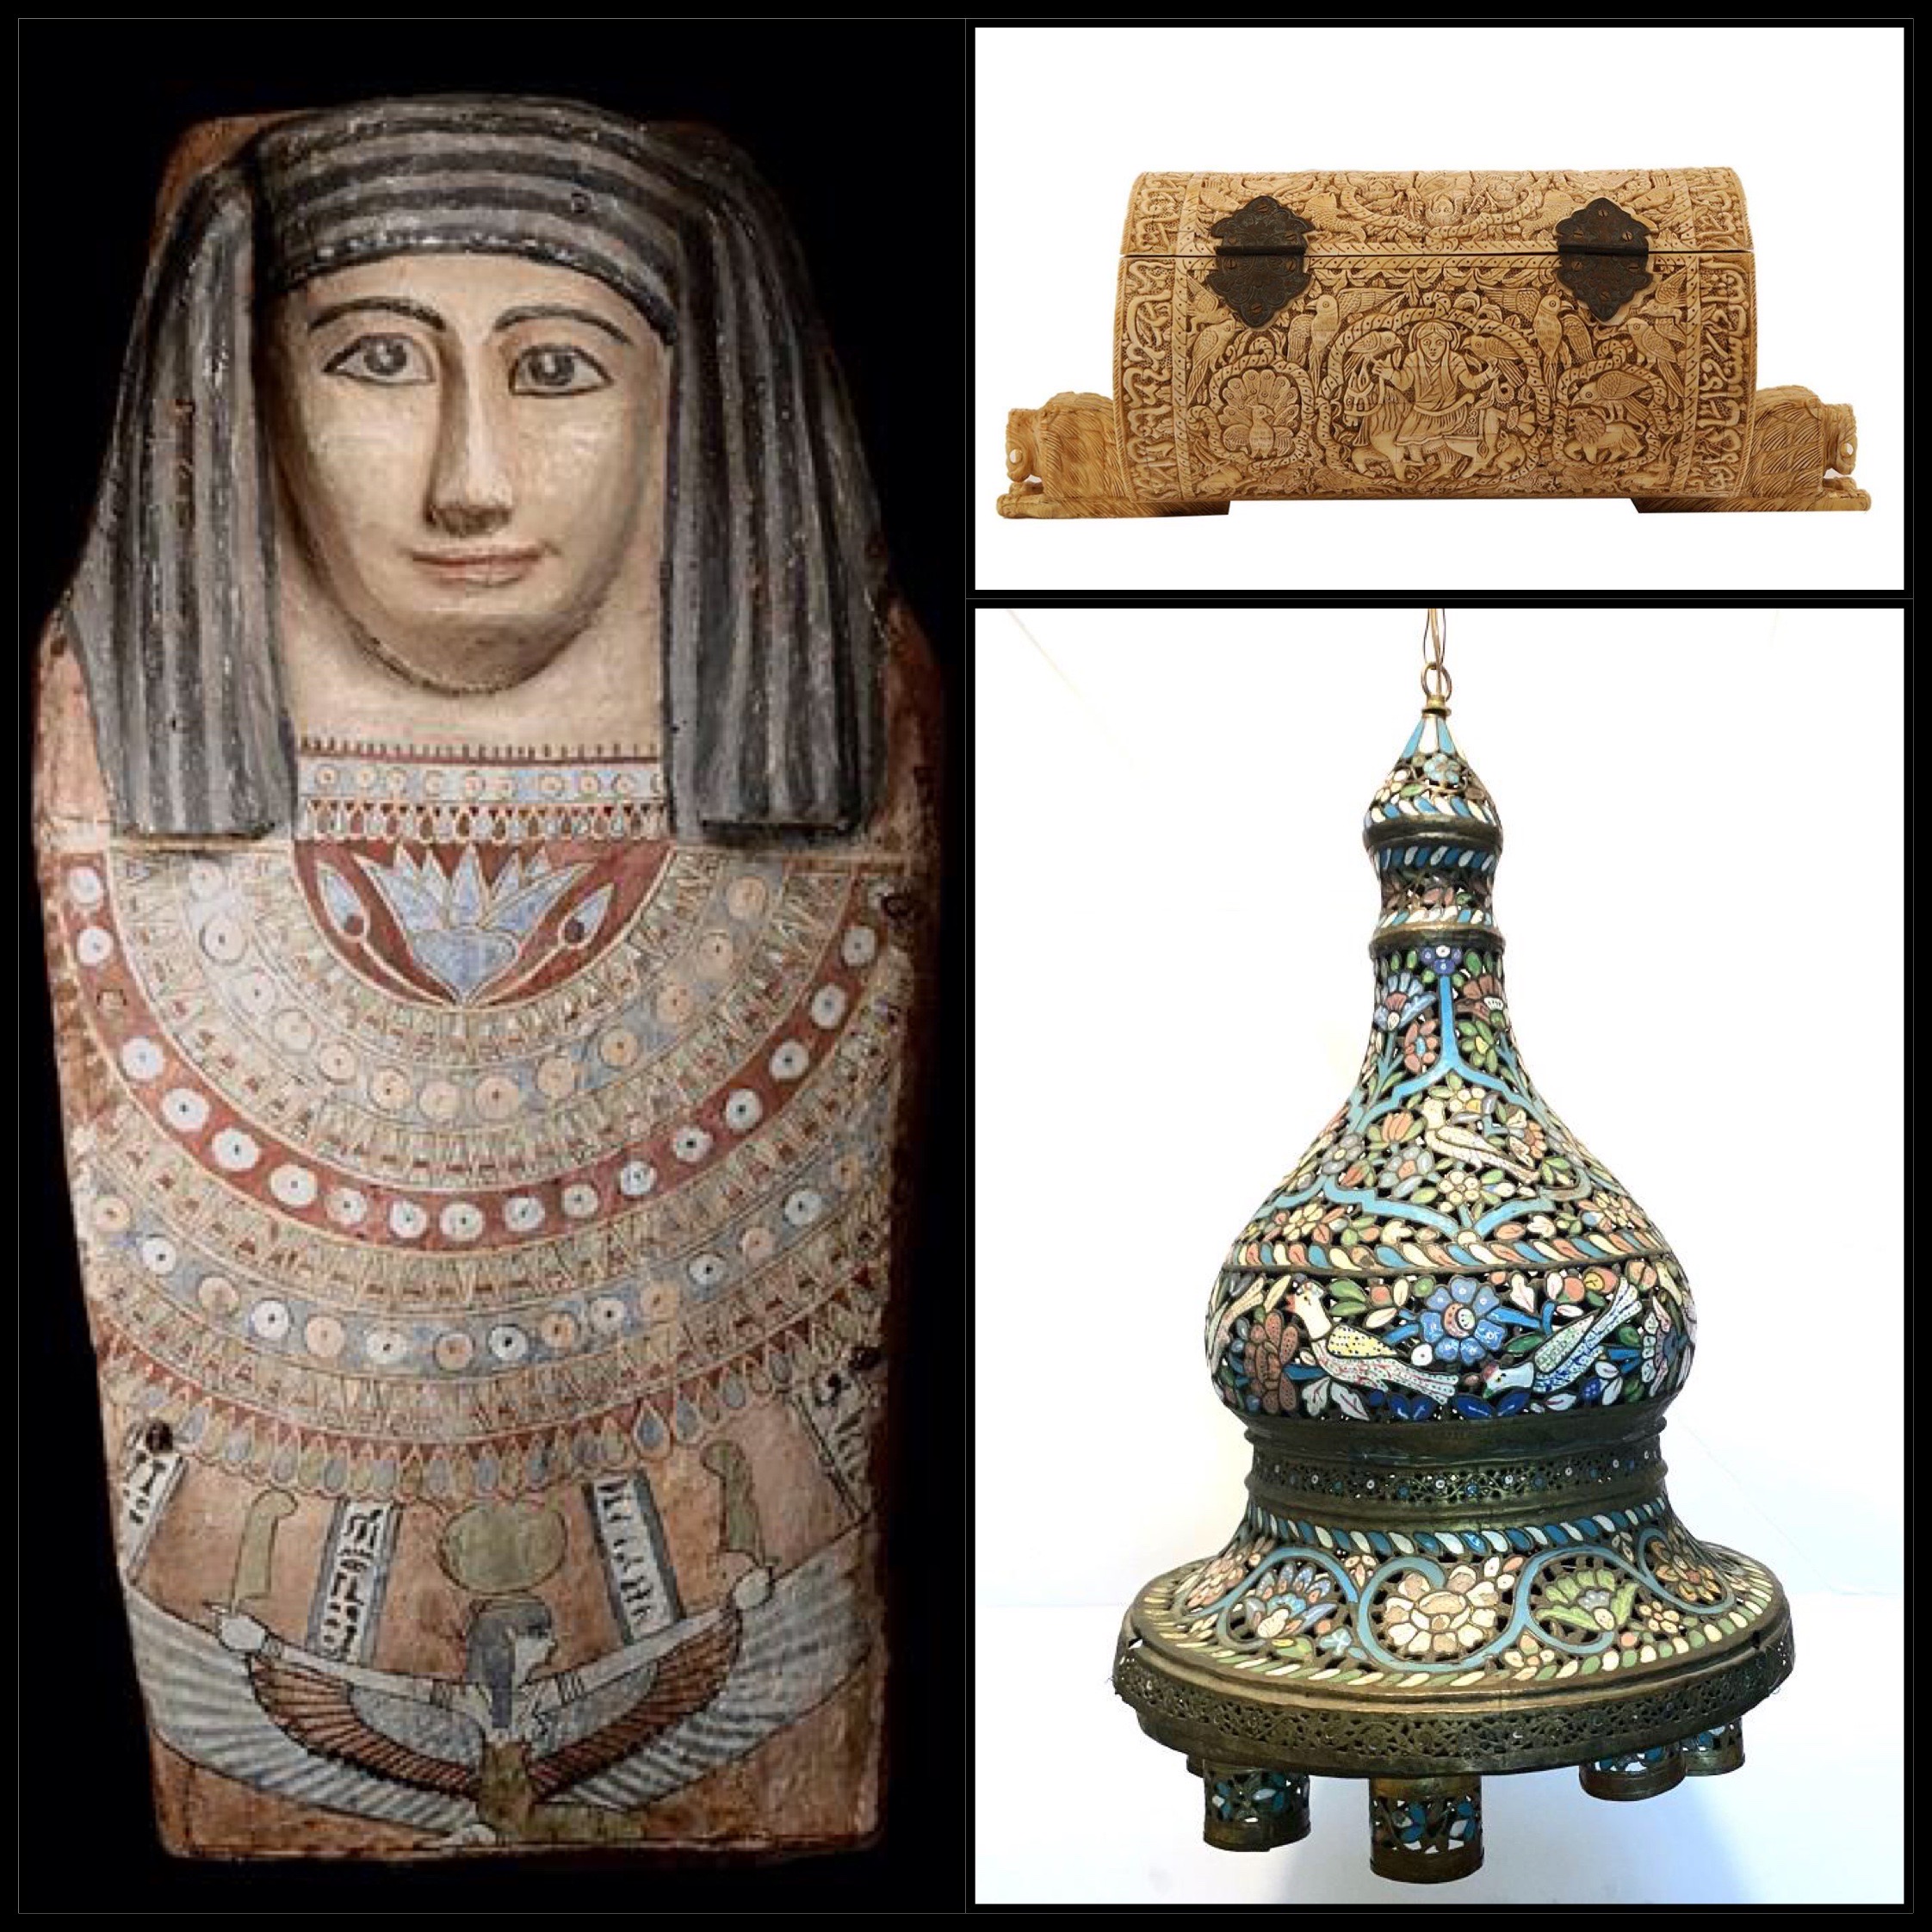 Ancient Egyptian Large Front Section of a Sarcophagus; India, Mughal Large Carved Bone Chest c.19th century; Large Islamic Ottoman Syrian enamel Lamp c.19th century